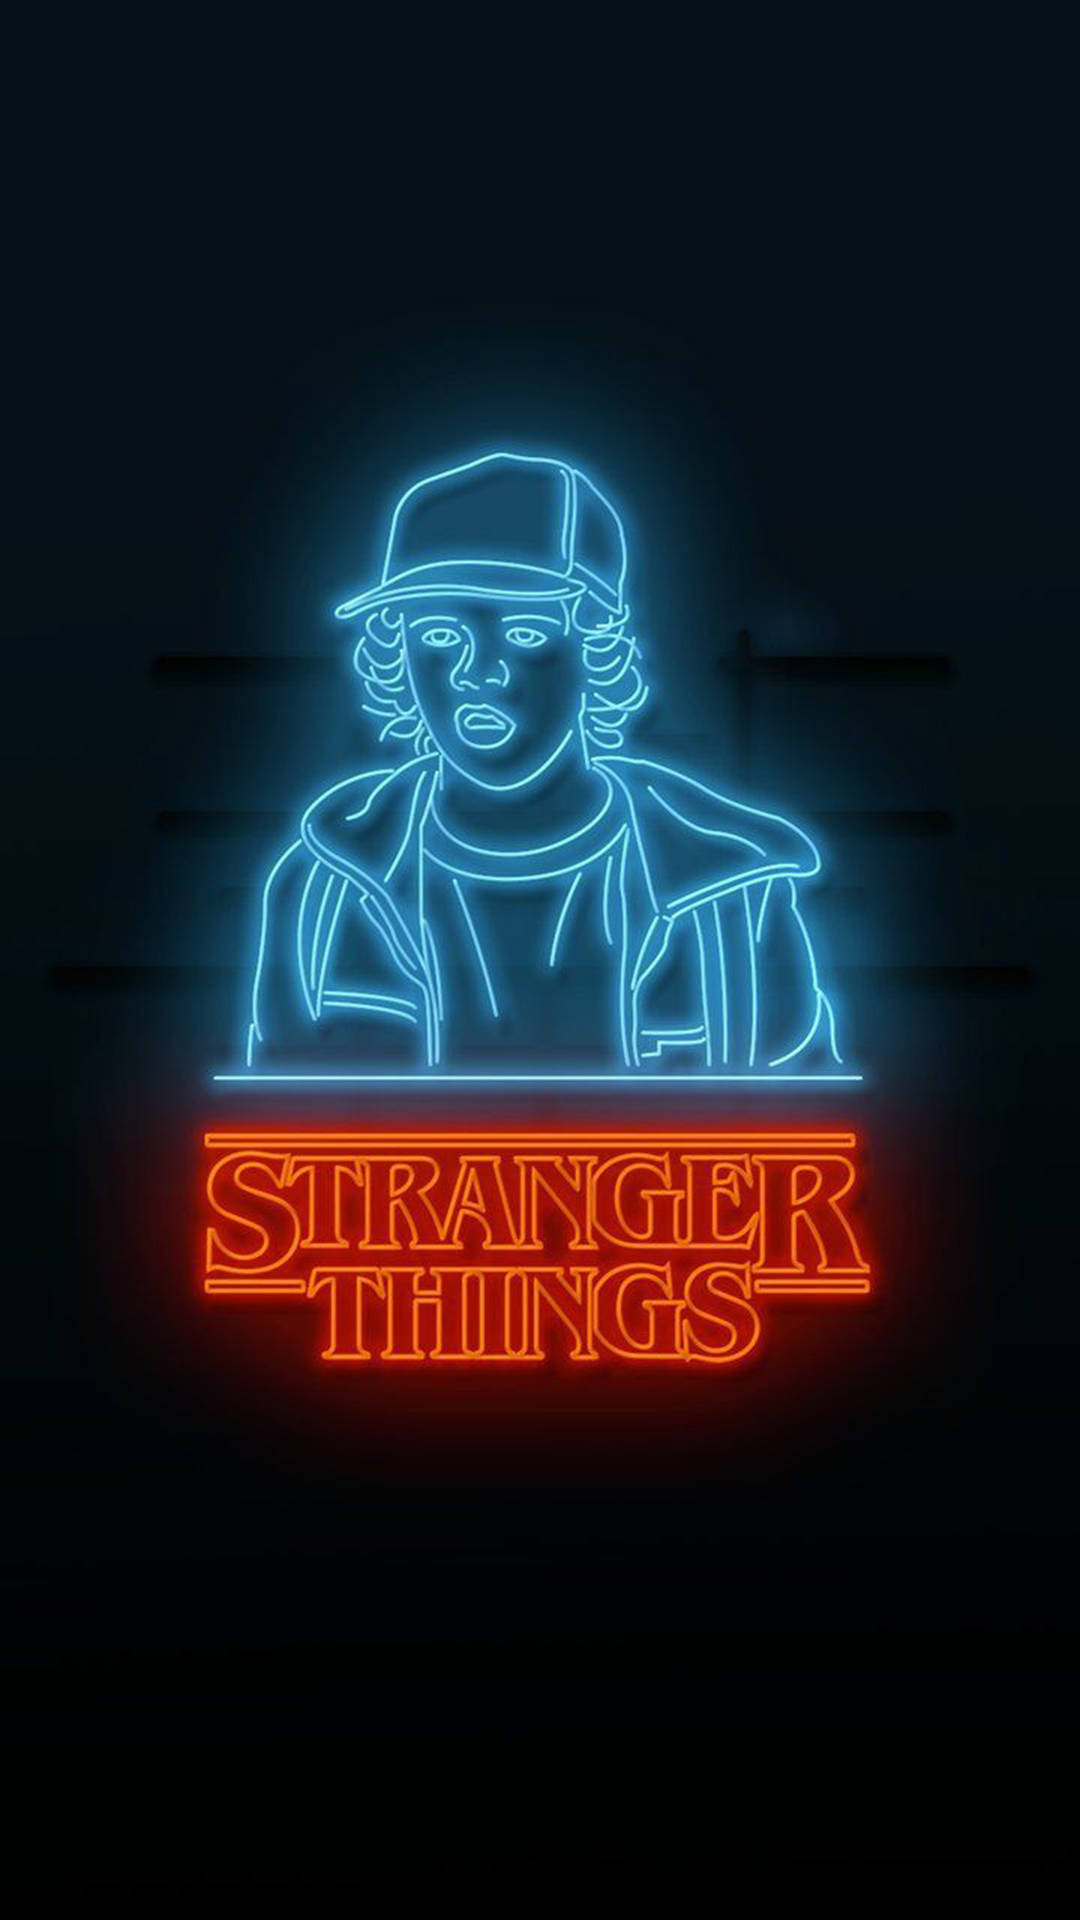 Iconic Stranger Things Artwork Displaying The Main Characters Against An Eerie, Otherworldly Backdrop. Perfect For Your Iphone. Wallpaper